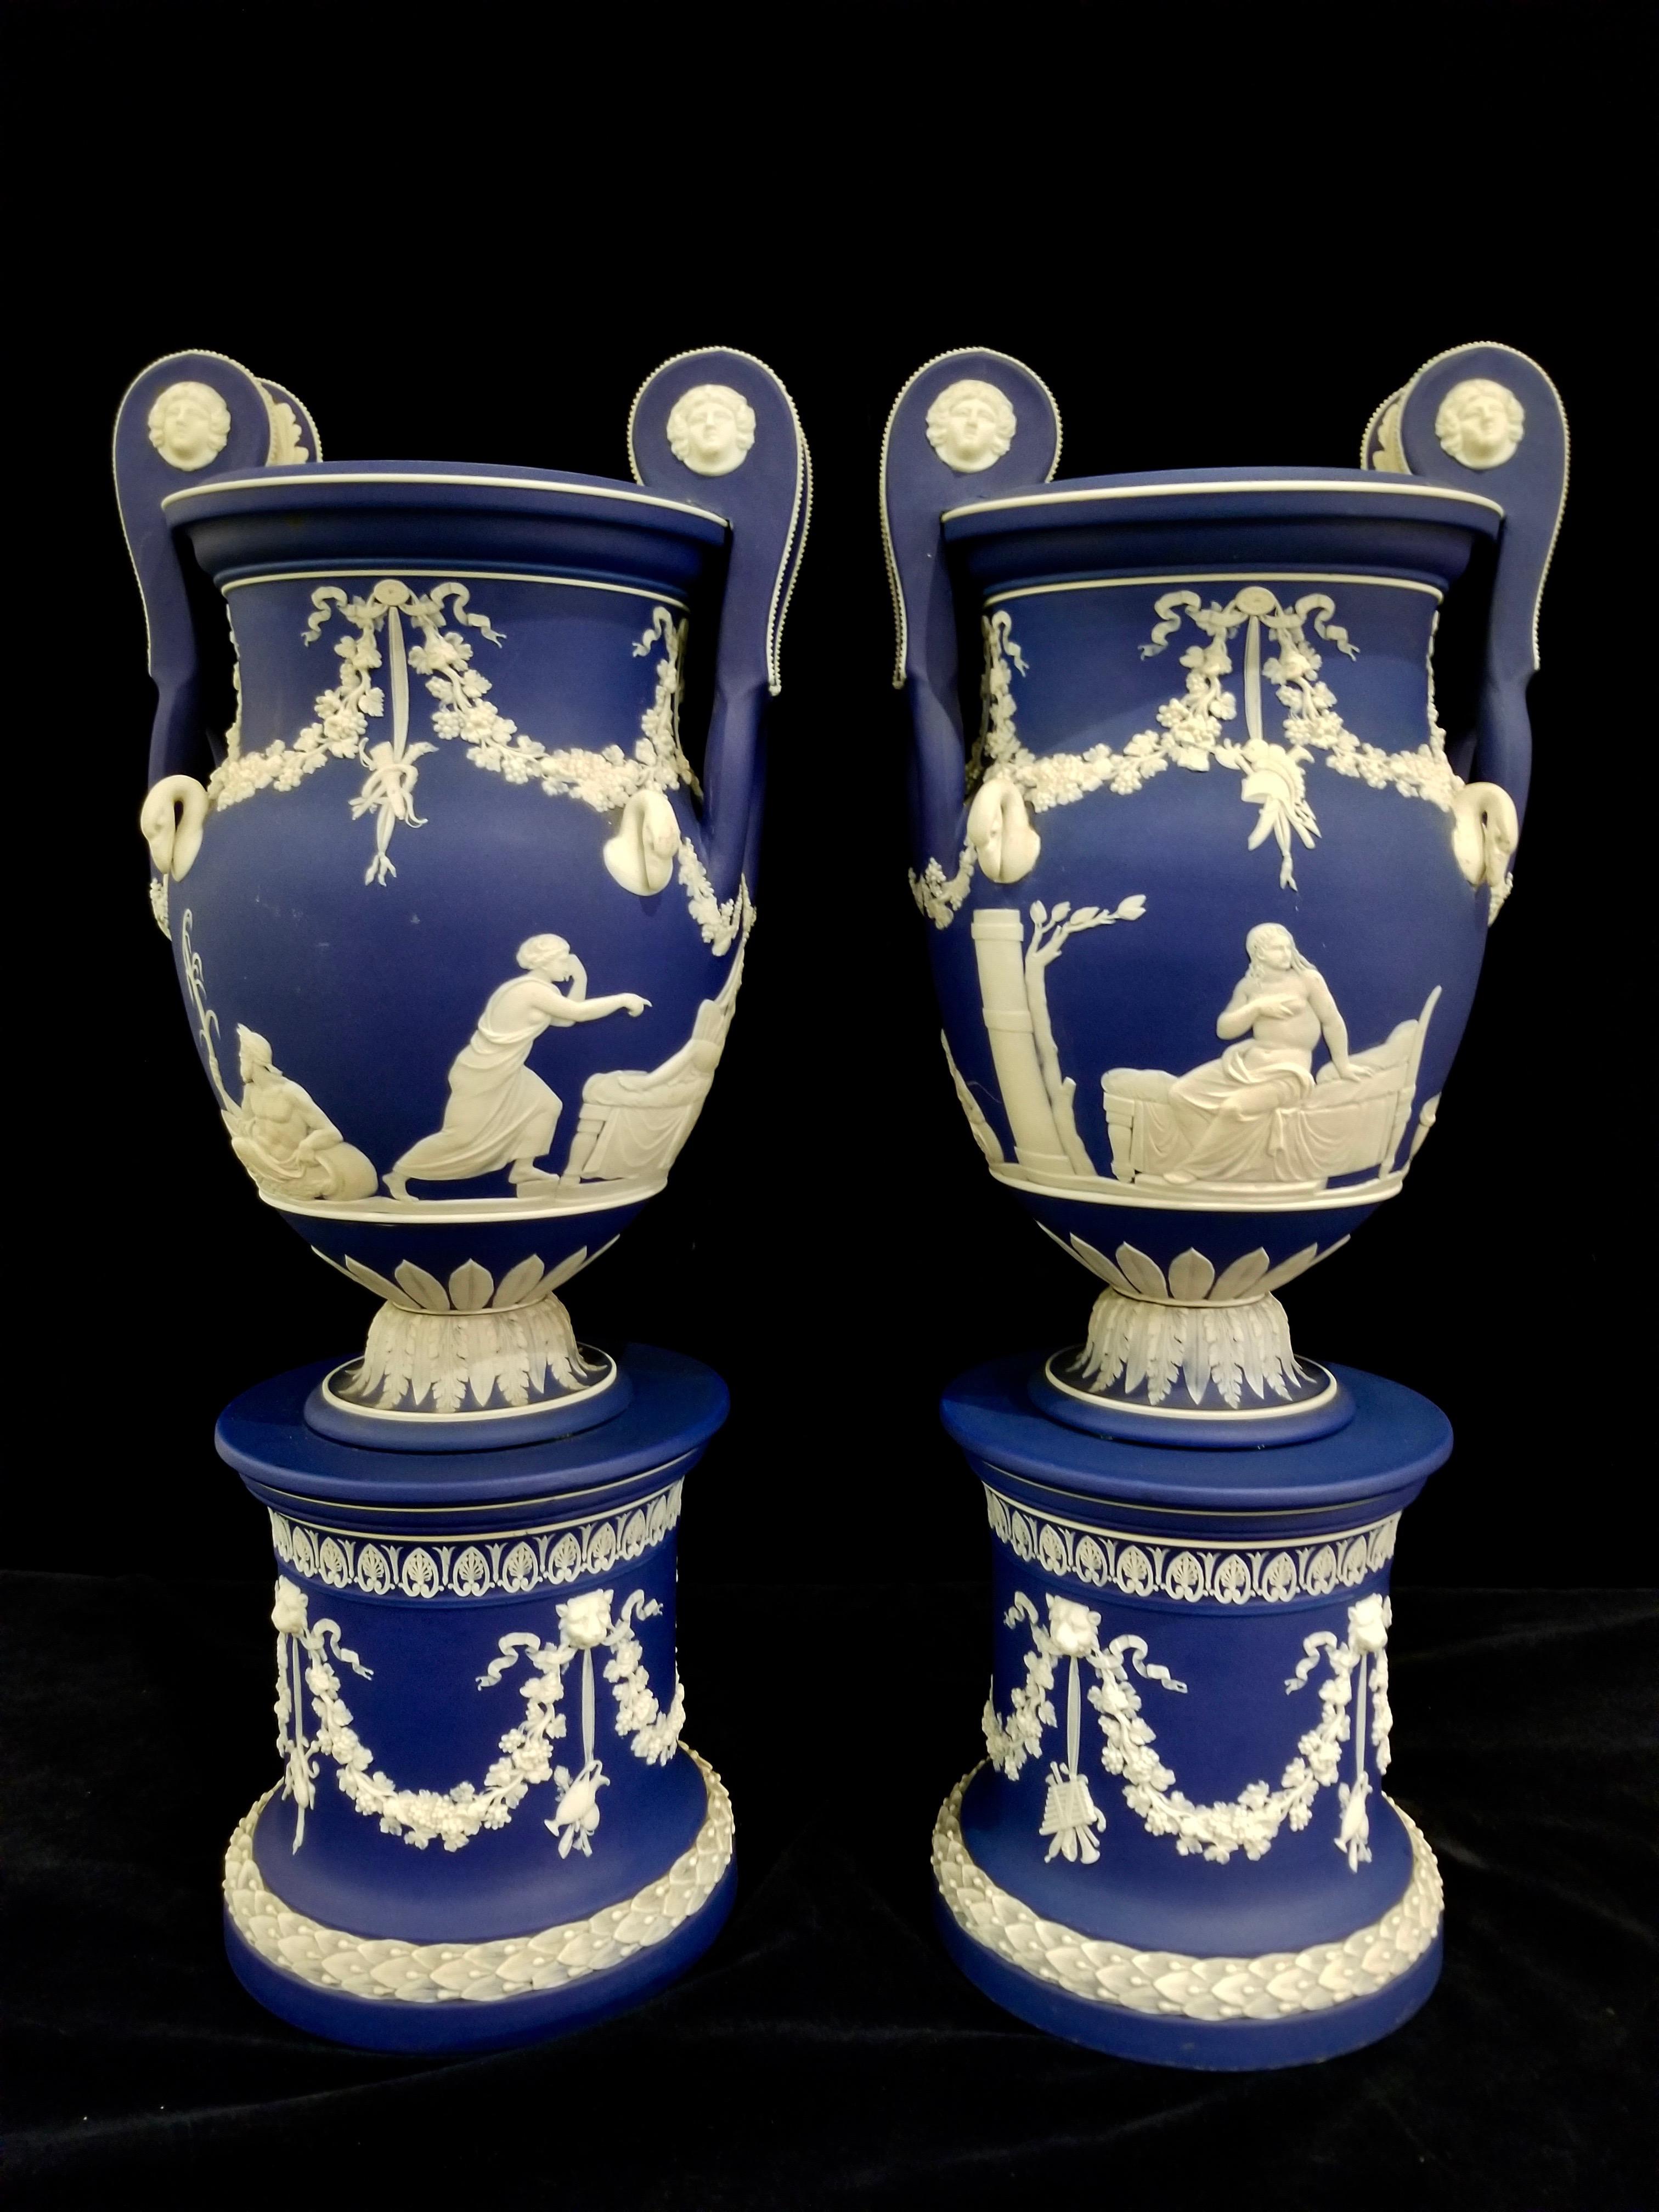 An exquisite and quite rare pair of 19th century English, Staffordshire, Jasperware blue ground Wedgwood vases with neoclassical subjects on rounded plinths, stylistically attributed to John Flaxman. Each of these vases are in exceptional condition